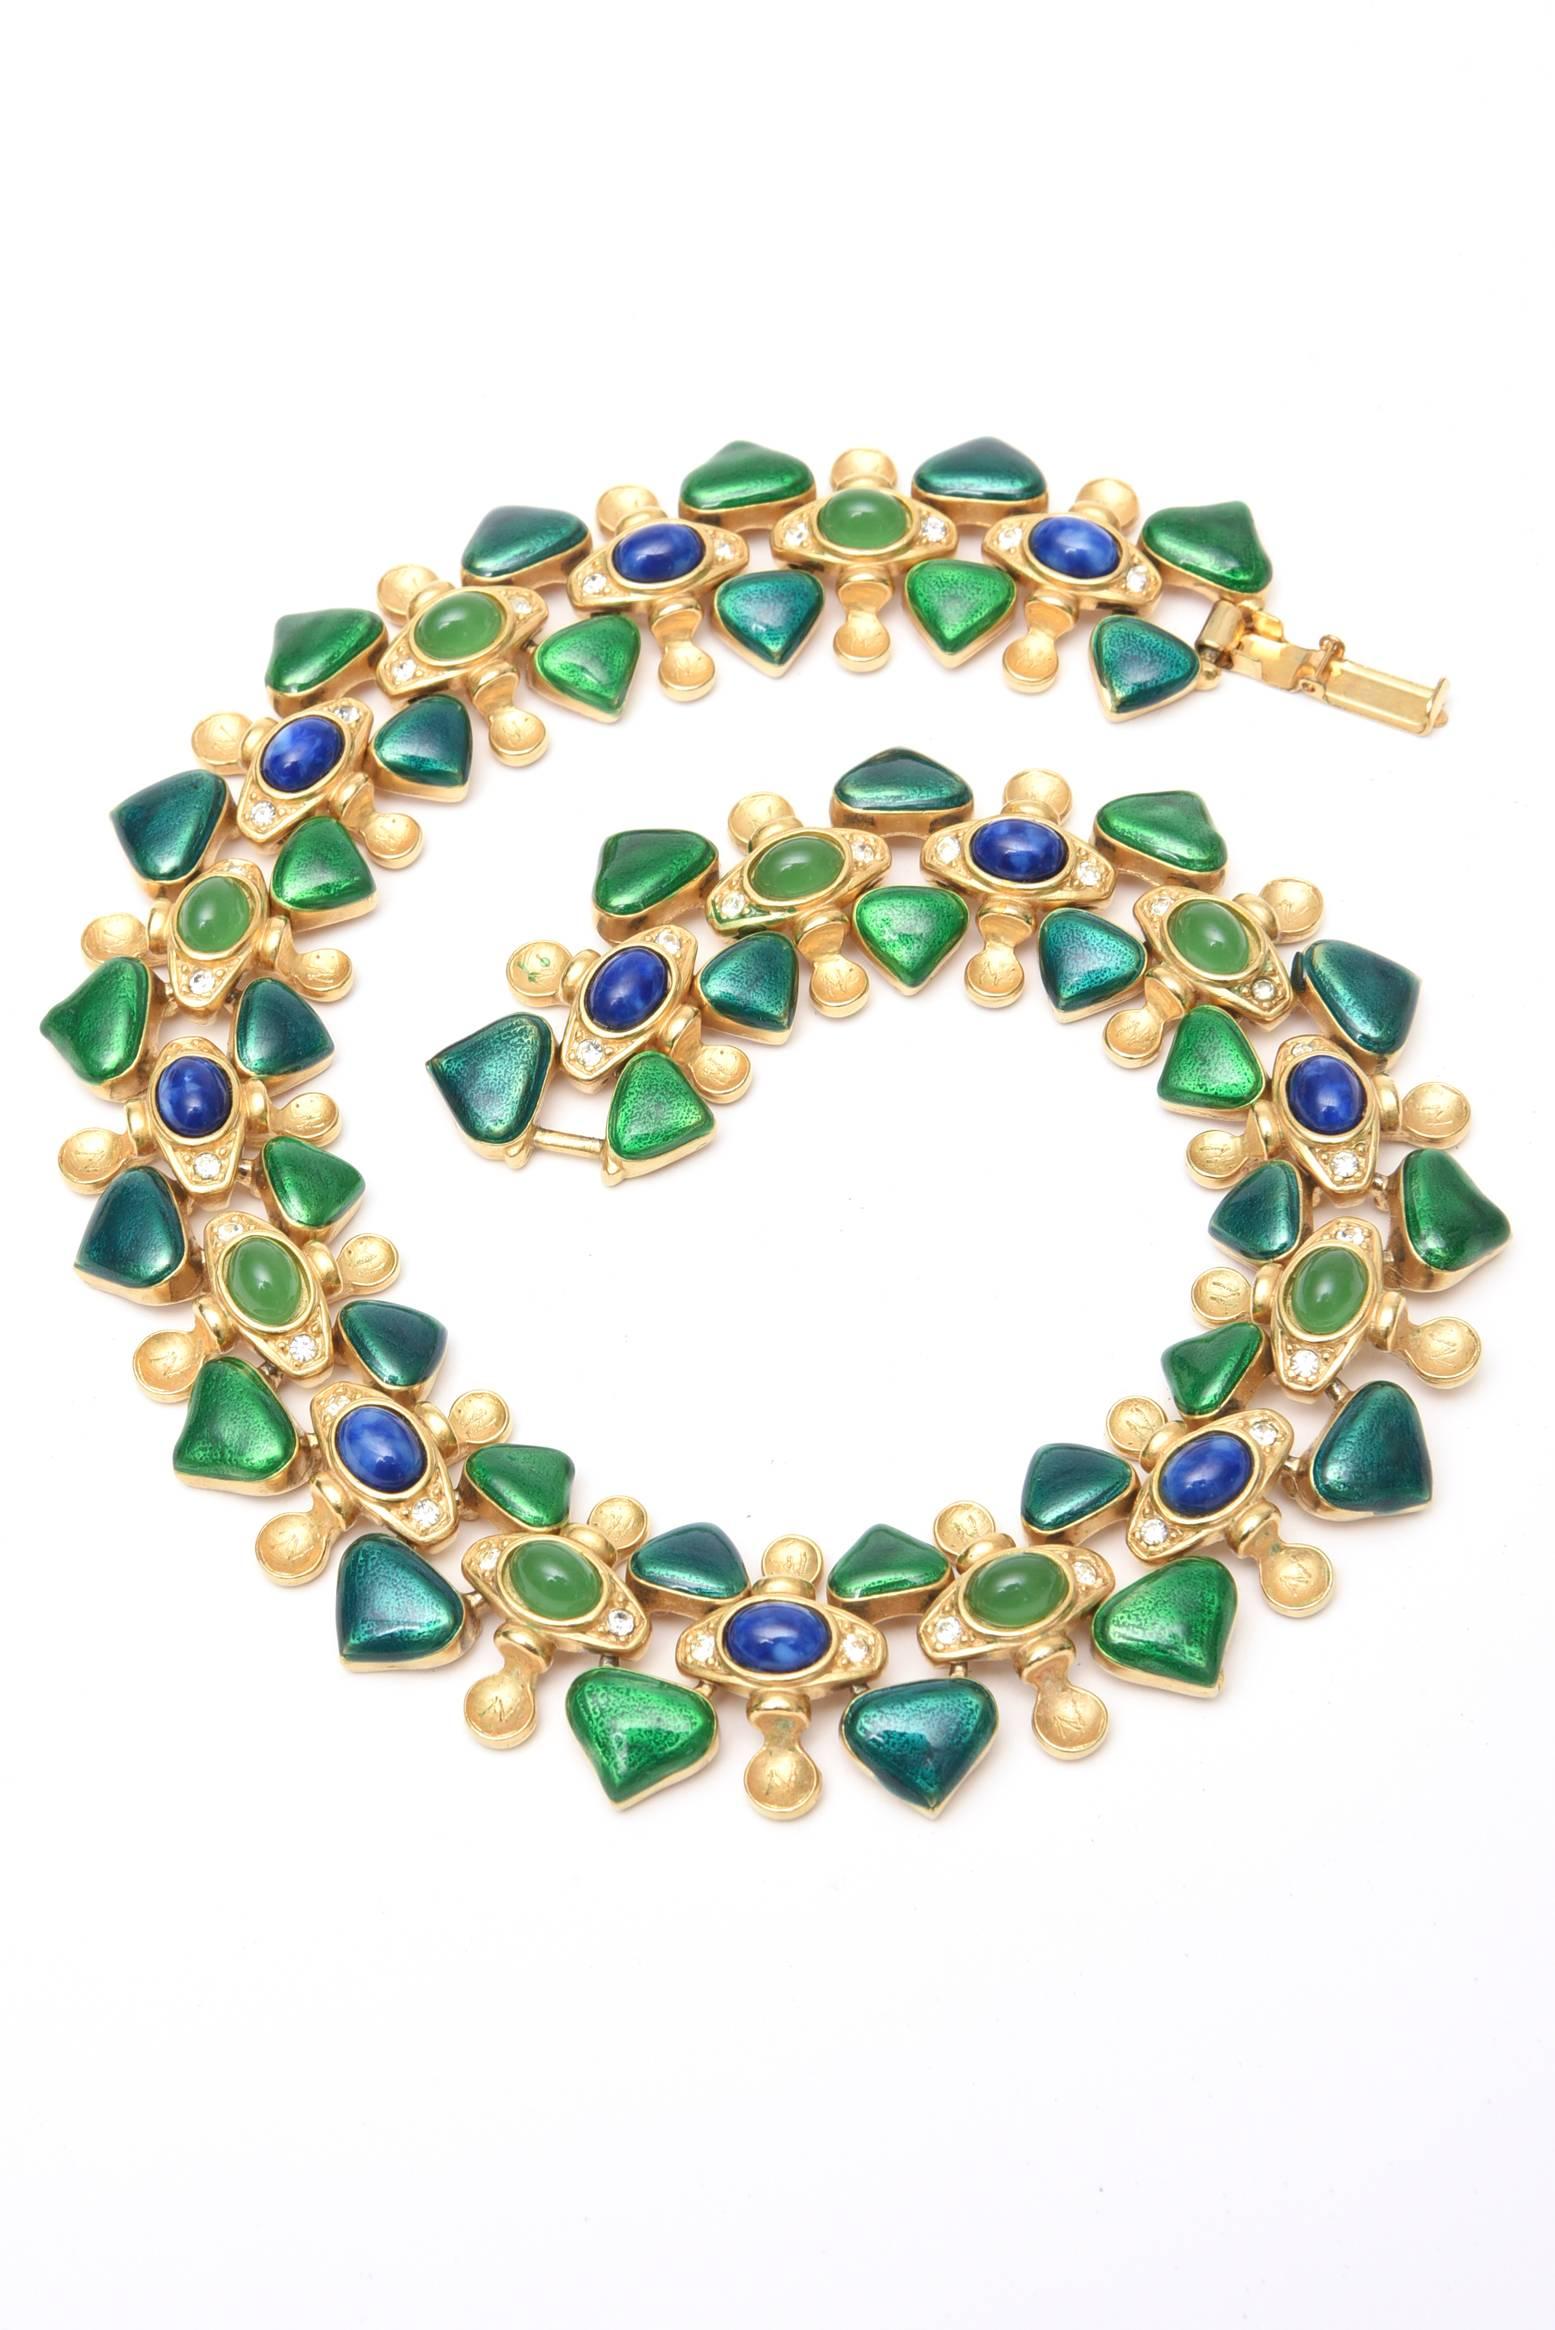 Women's Stunning Napier Enameled Collared Necklace